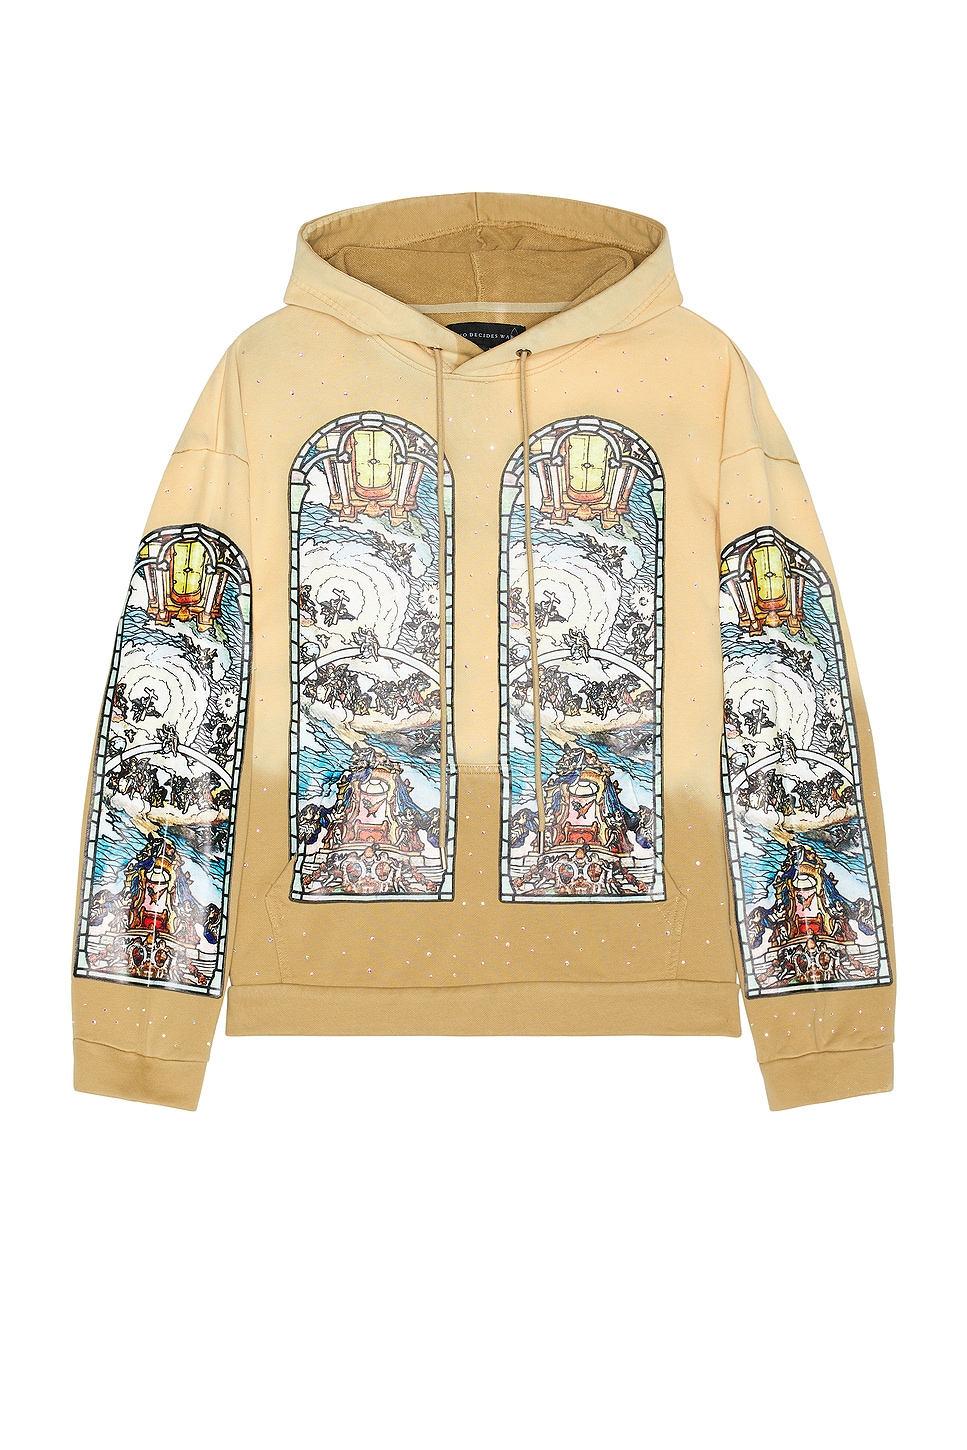 Image 1 of Who Decides War by Ev Bravado Chalice Embroidered Hoodie in Cream